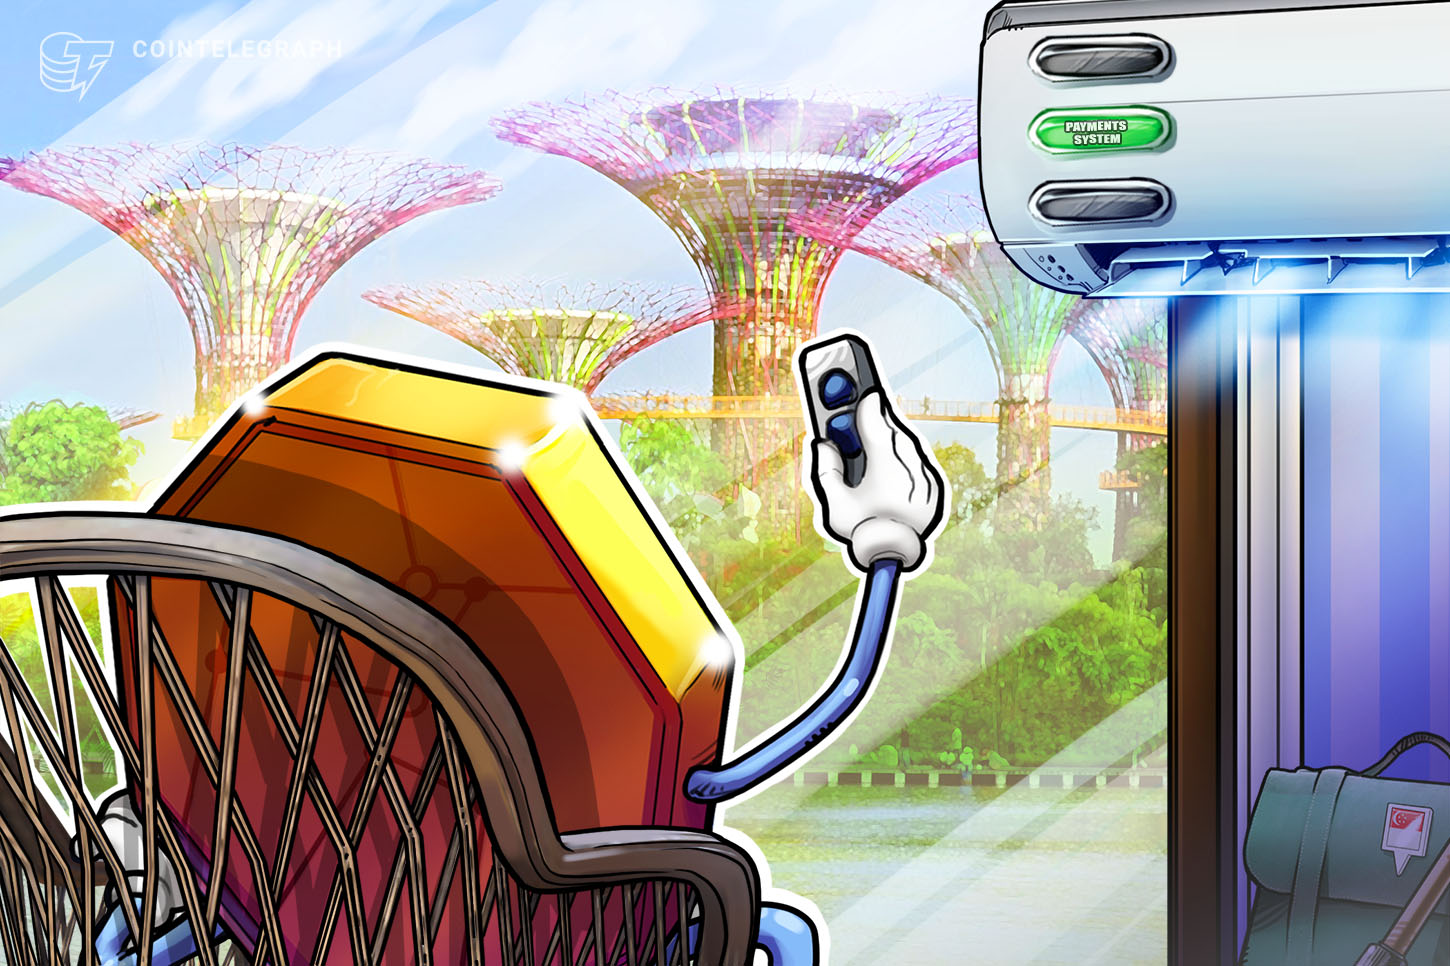 Singapore’s Nationwide Funds System Can Information International Crypto Adoption